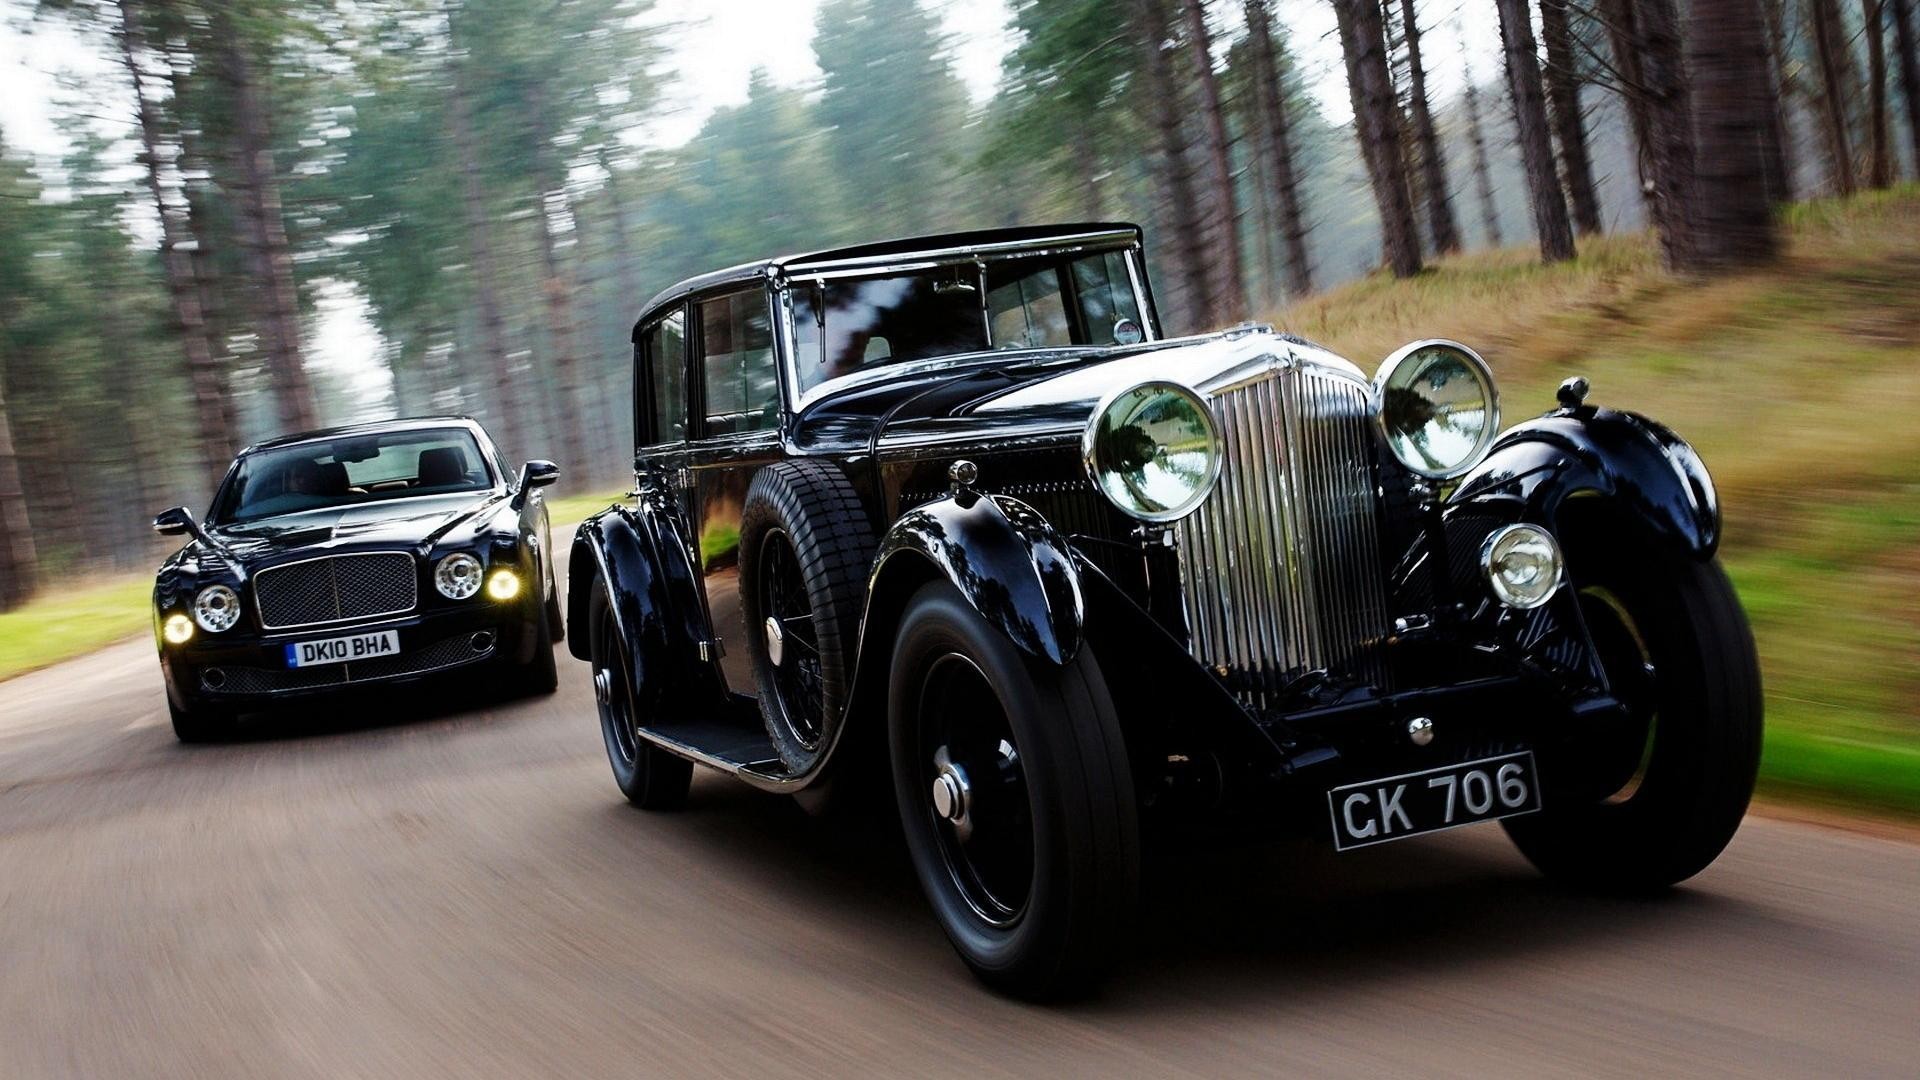 Vehicle Car Old Car Classic Car Bentley Bentley Mulsanne Road Trees Forest Motion Blur Black Cars 1920x1080